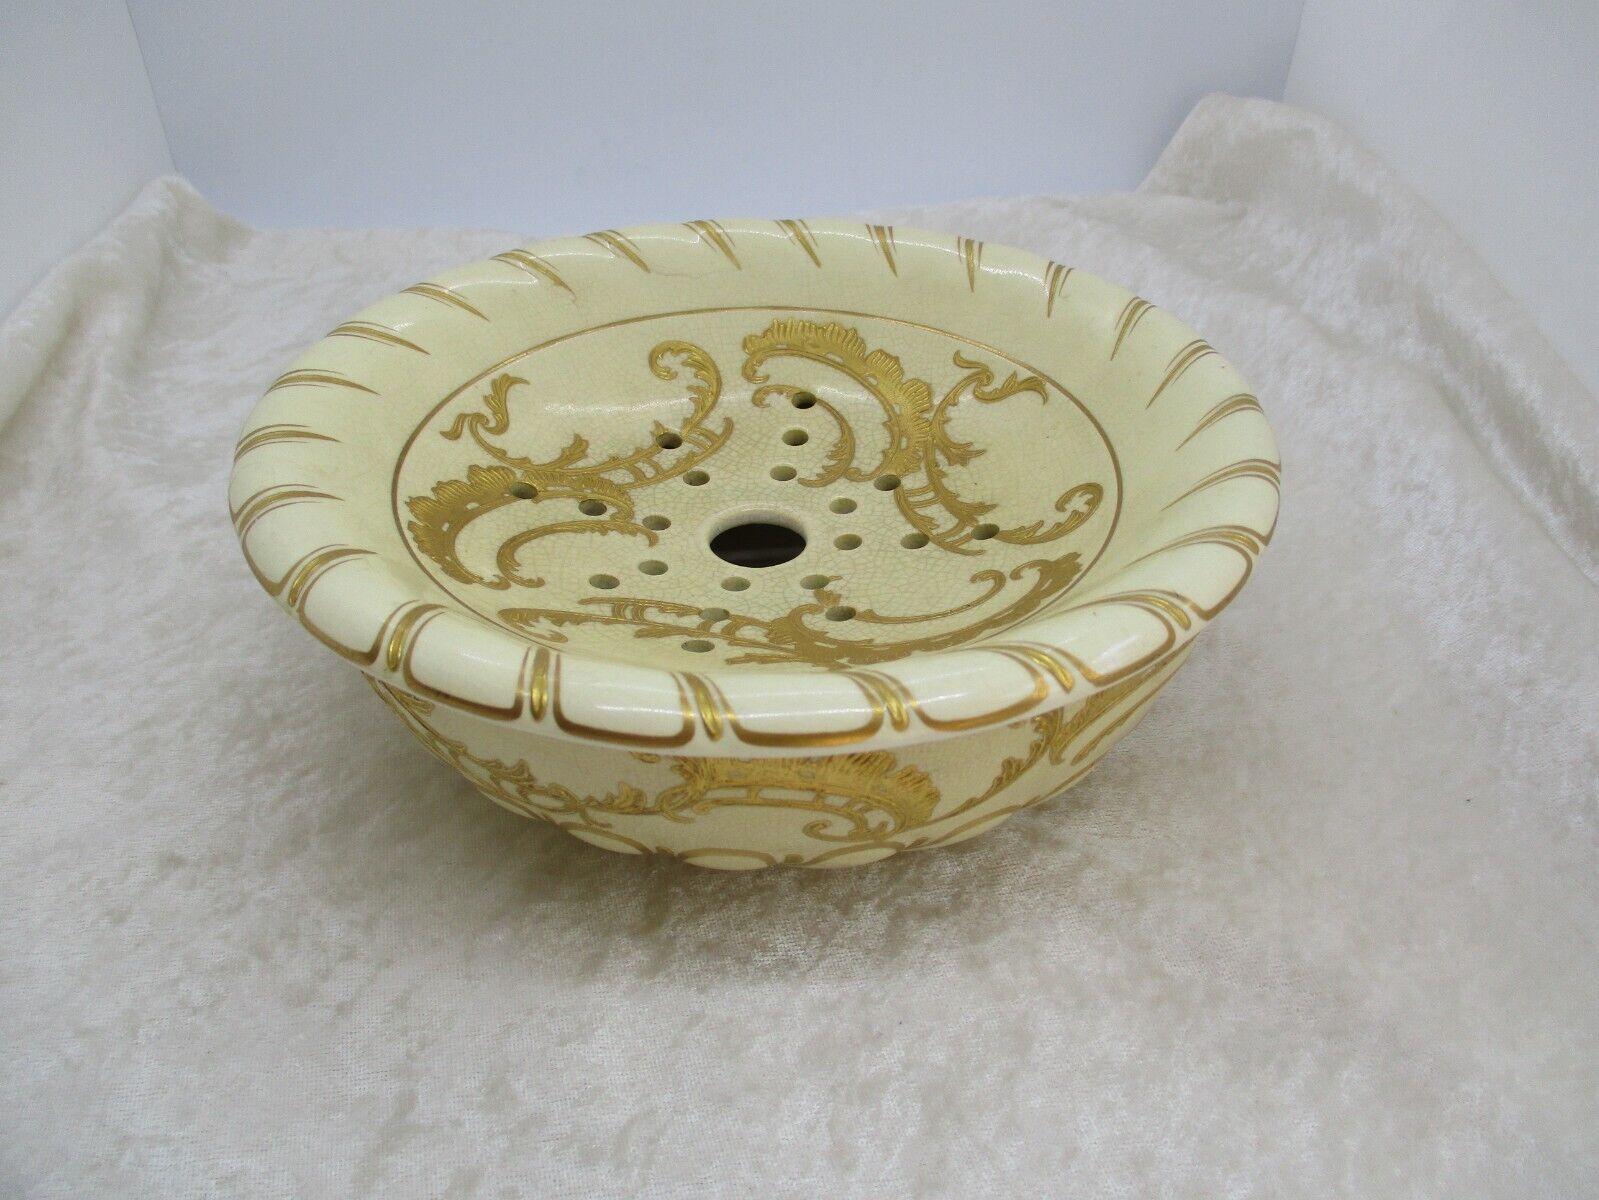 Vintage Antique Pottery Berry Plate with Holes and Under Bowl with Embossed Gold